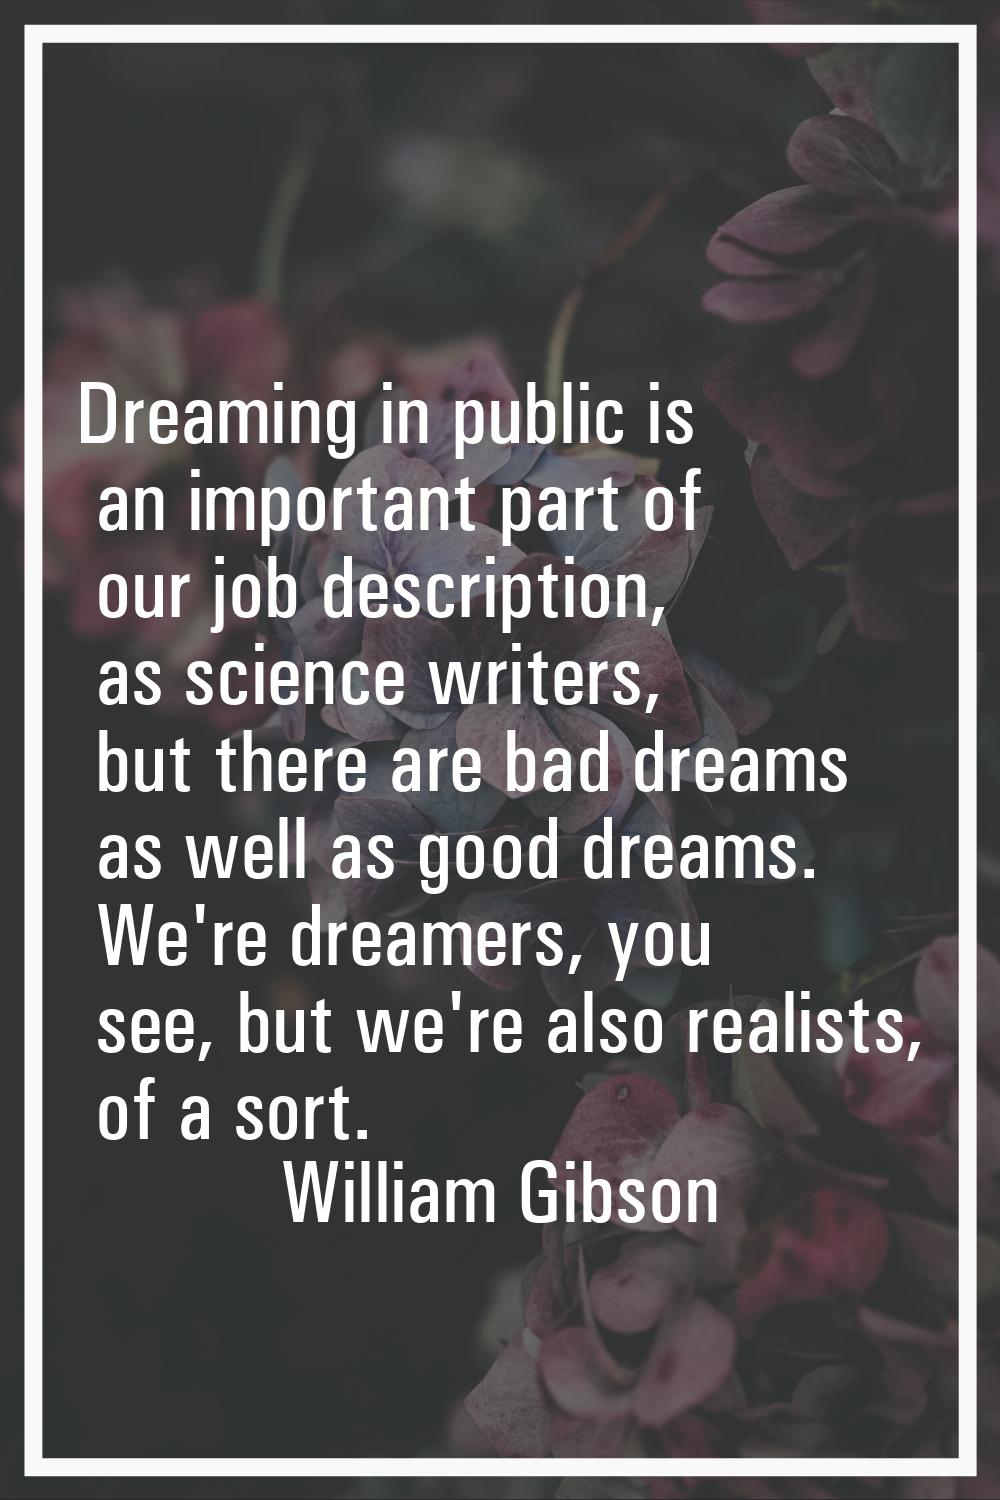 Dreaming in public is an important part of our job description, as science writers, but there are b